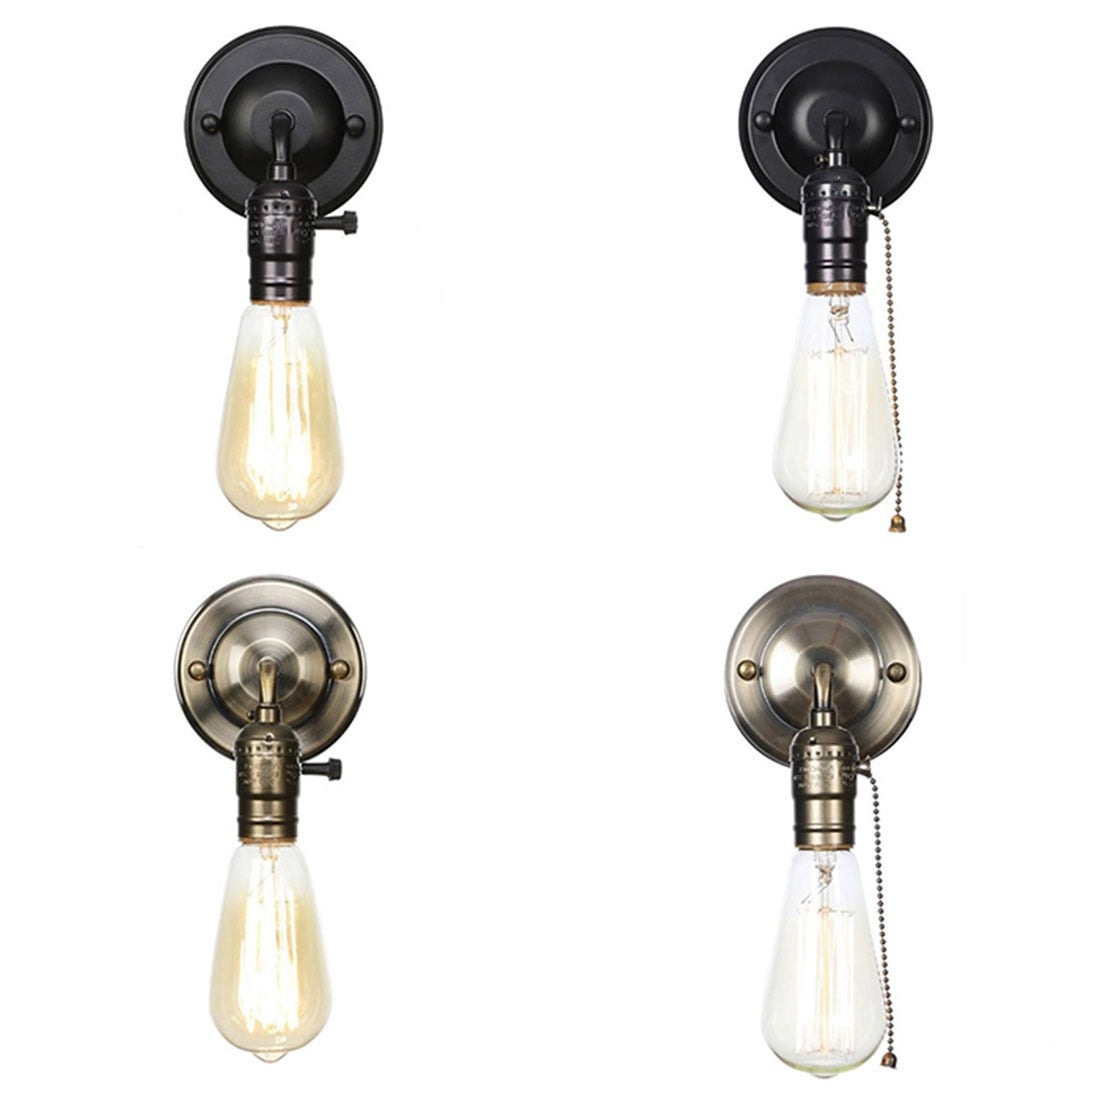 Pull Chain Switch Scones led Wall Lights Chrome Loft Style Retro Vintage Iron Bedroom Wall Lamp Bedside Lampen Stair Wandlamp